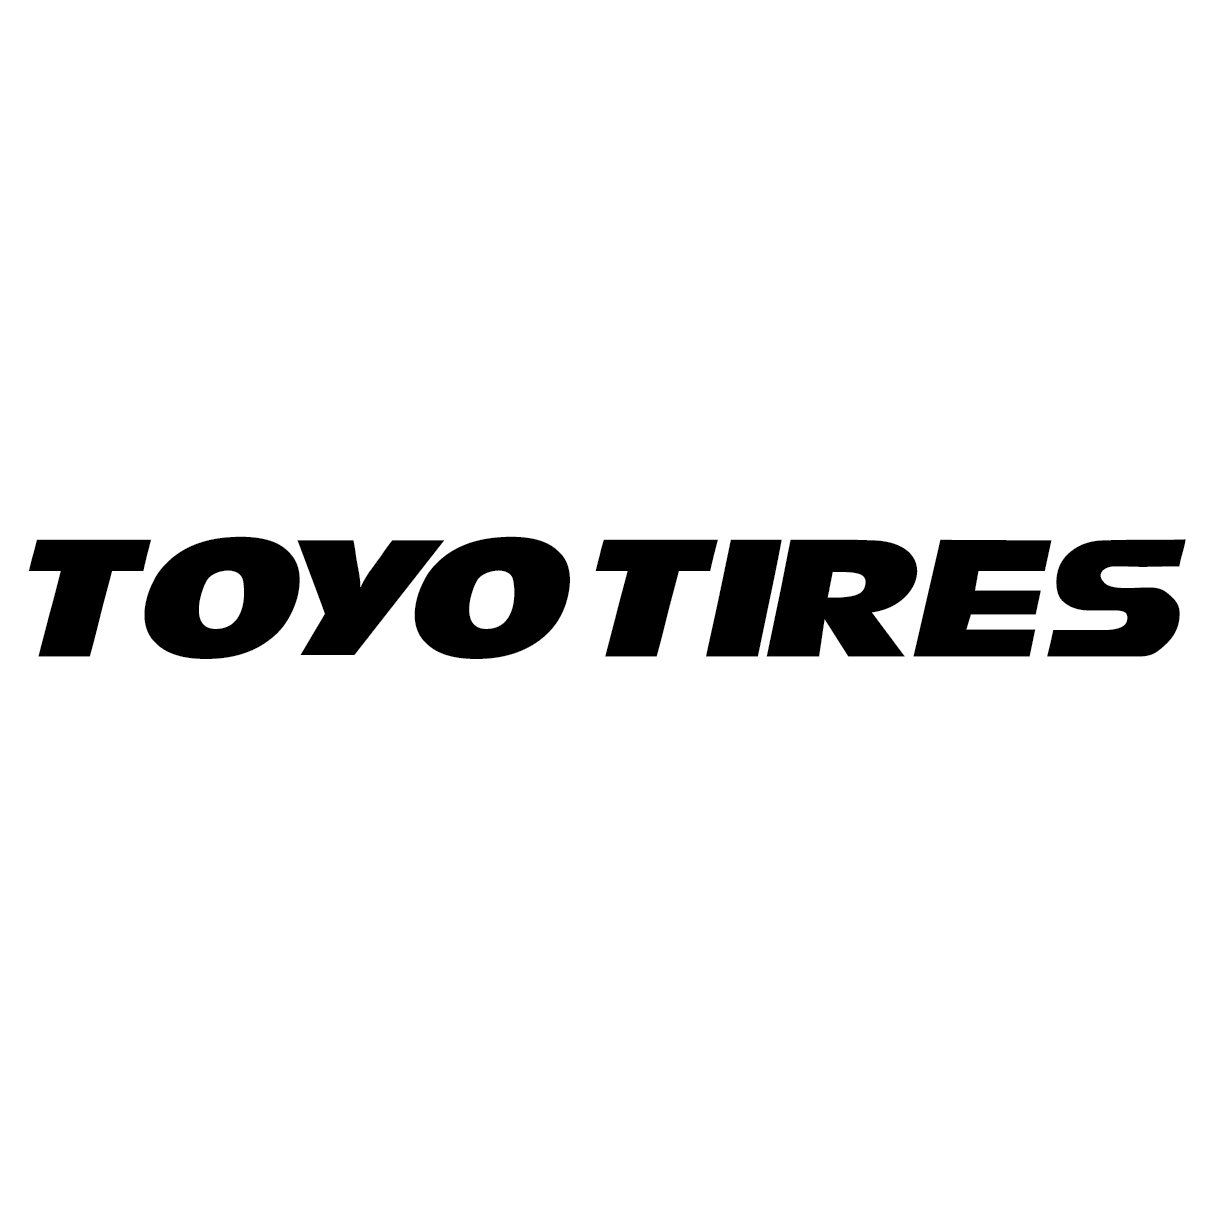 Toyo Tires.png